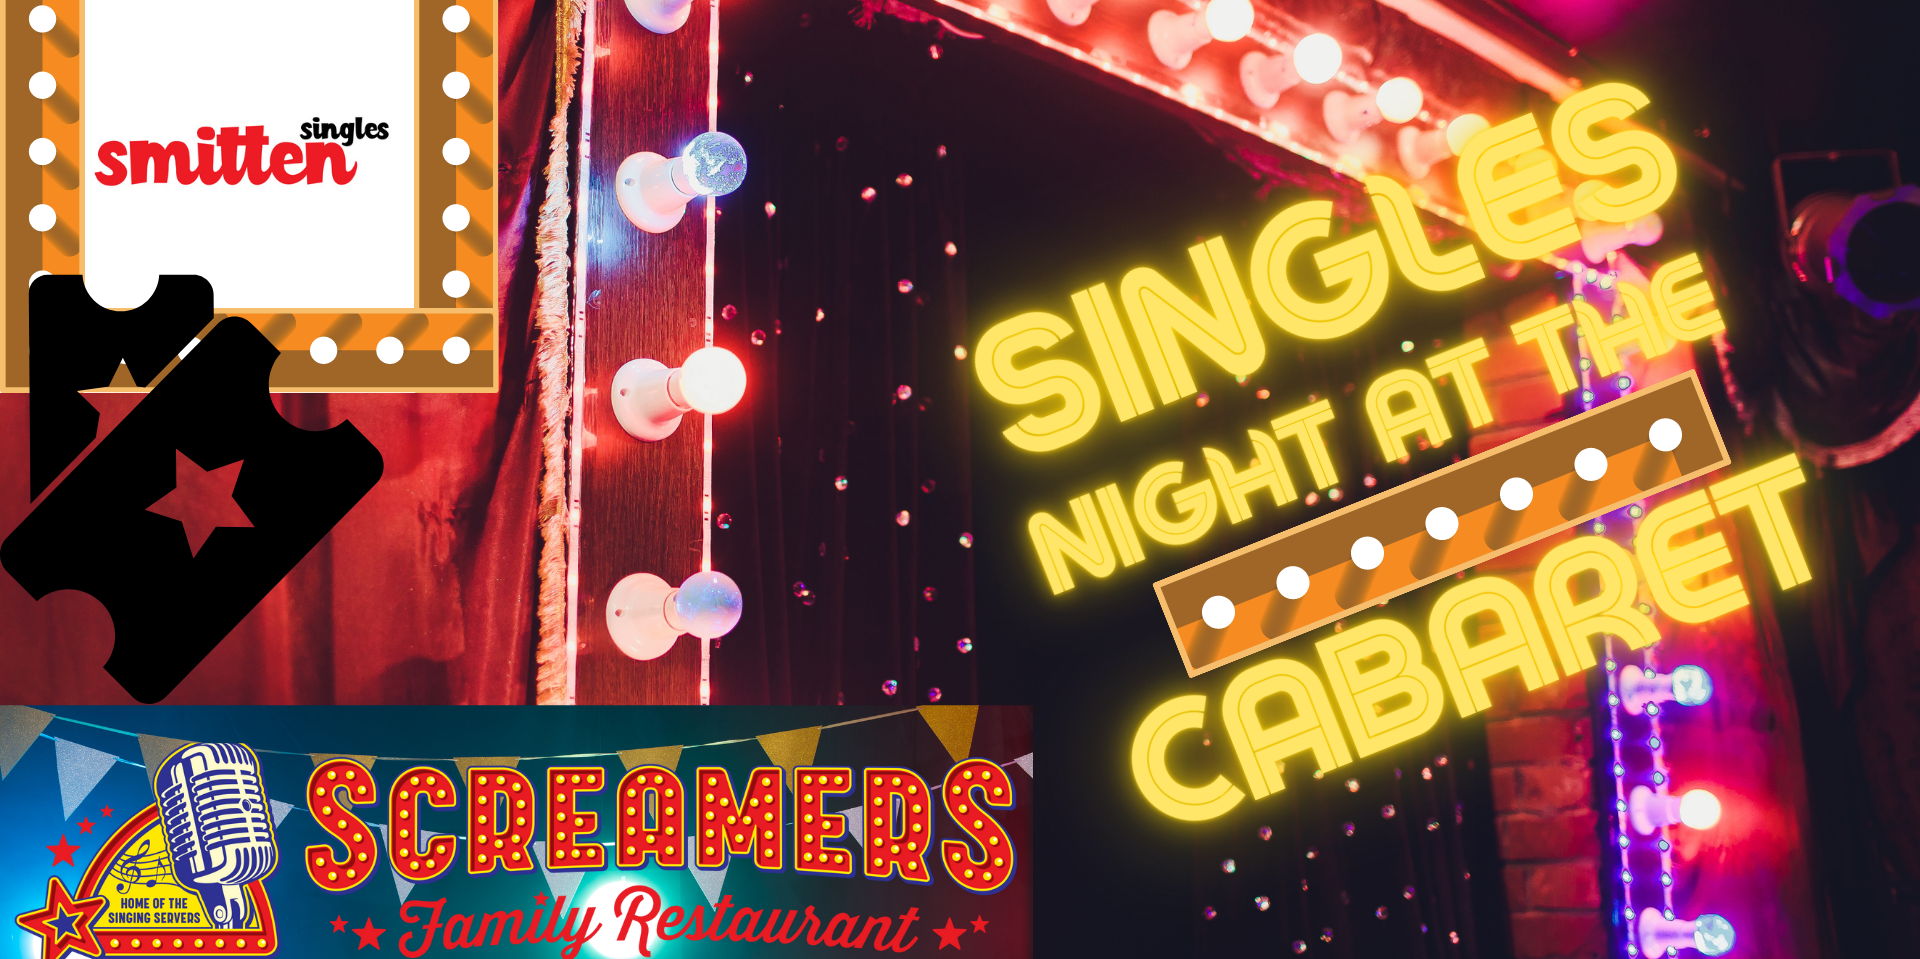 Lincoln Singles Night at the Cabaret promotional image